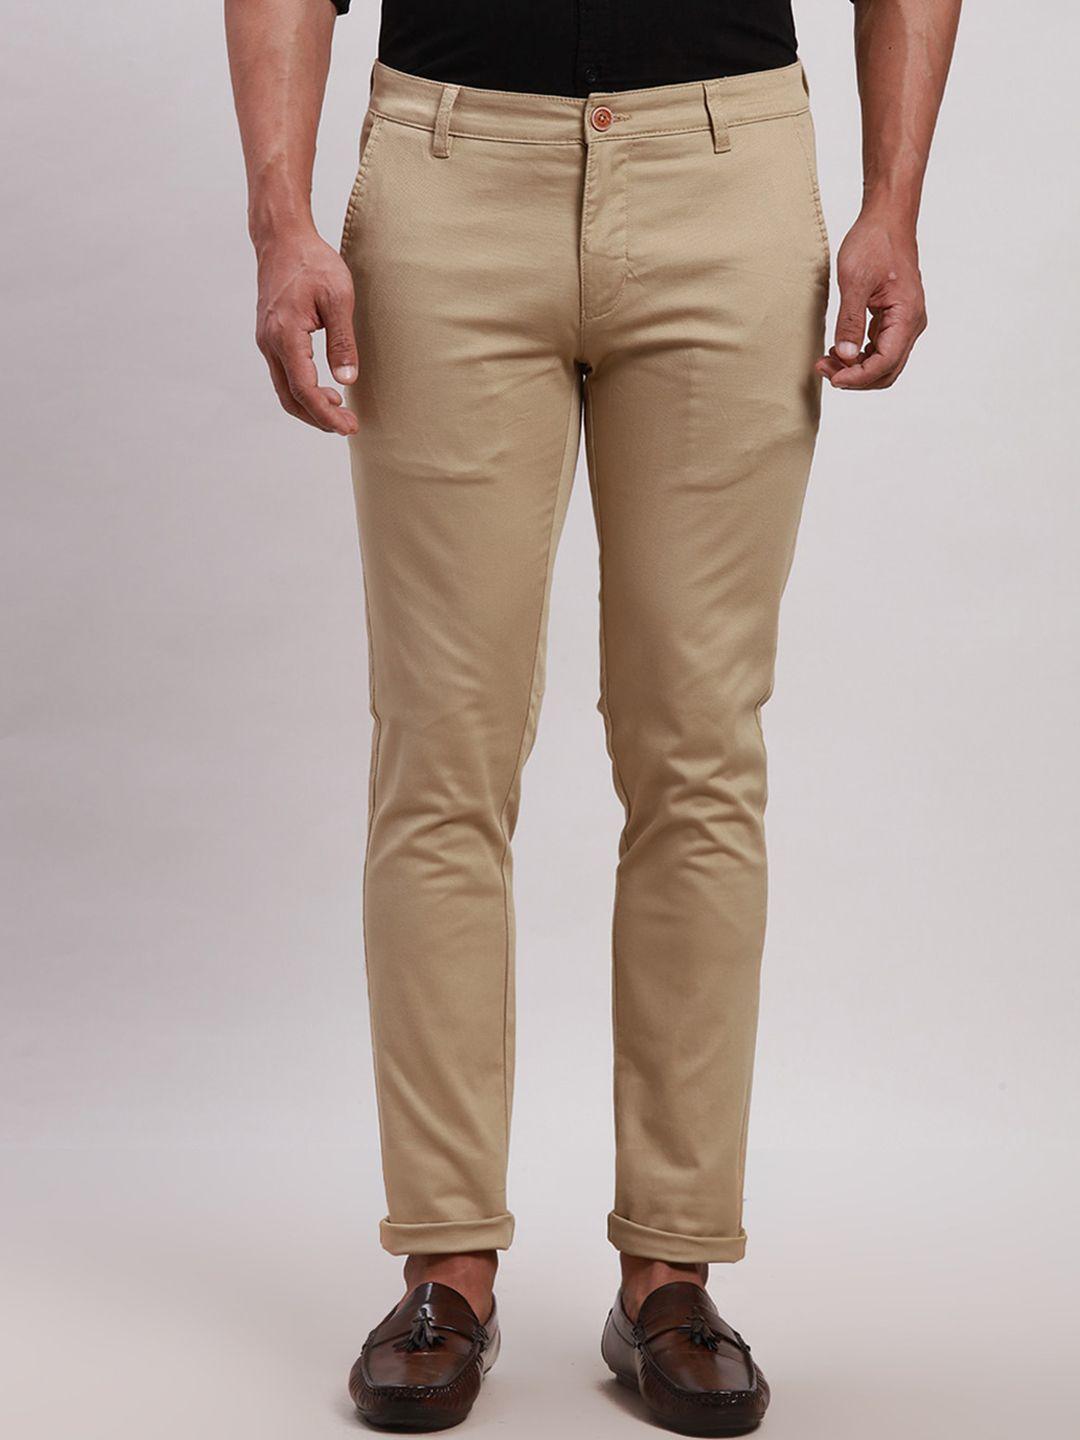 parx men slim fit chinos trousers